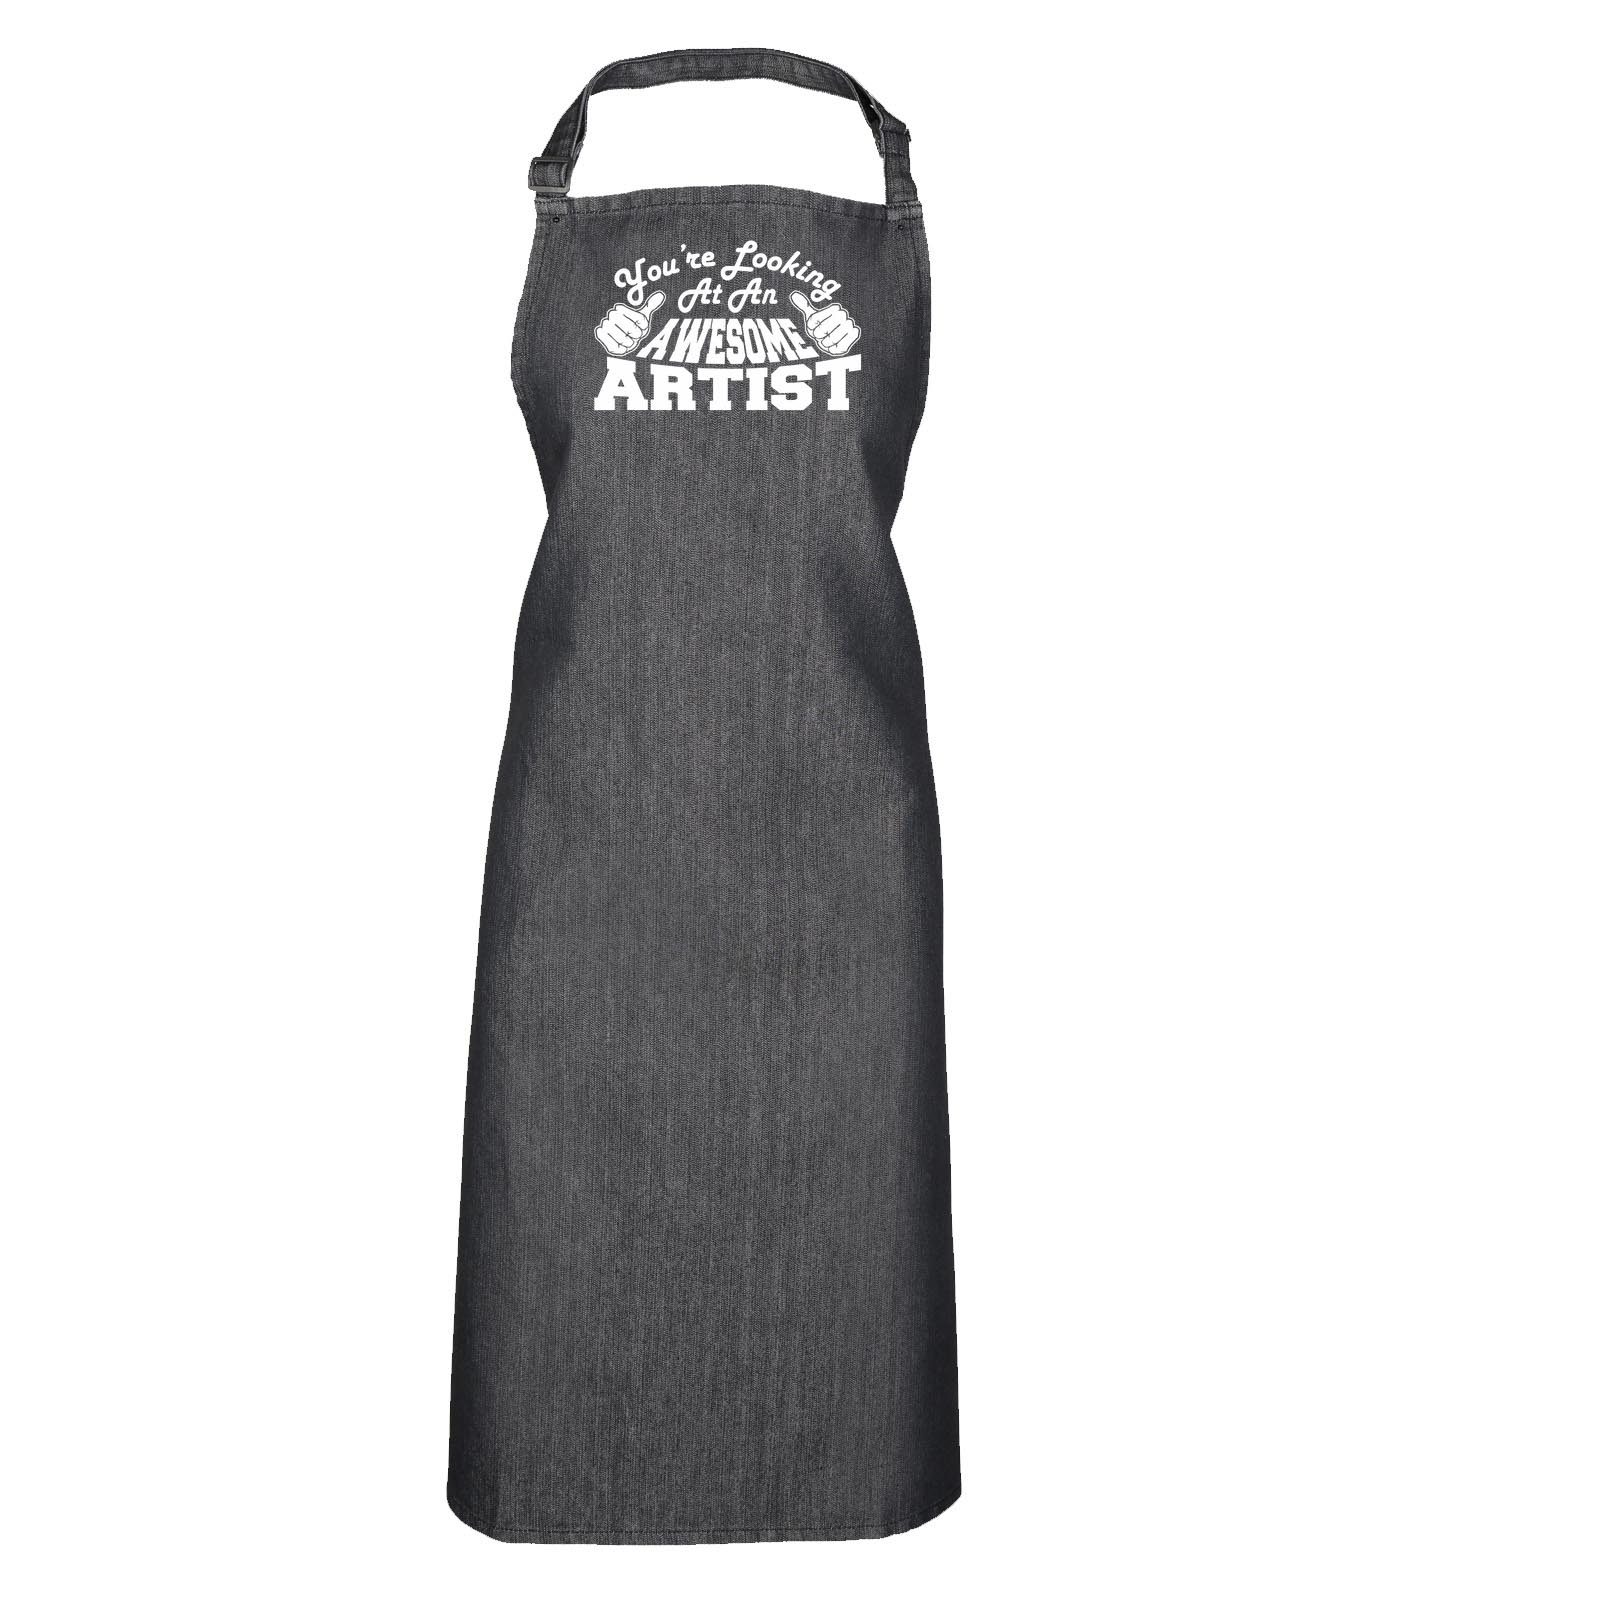 Funny Novelty Apron Kitchen Cooking Chiropractor Youre Looking At An Awesome 